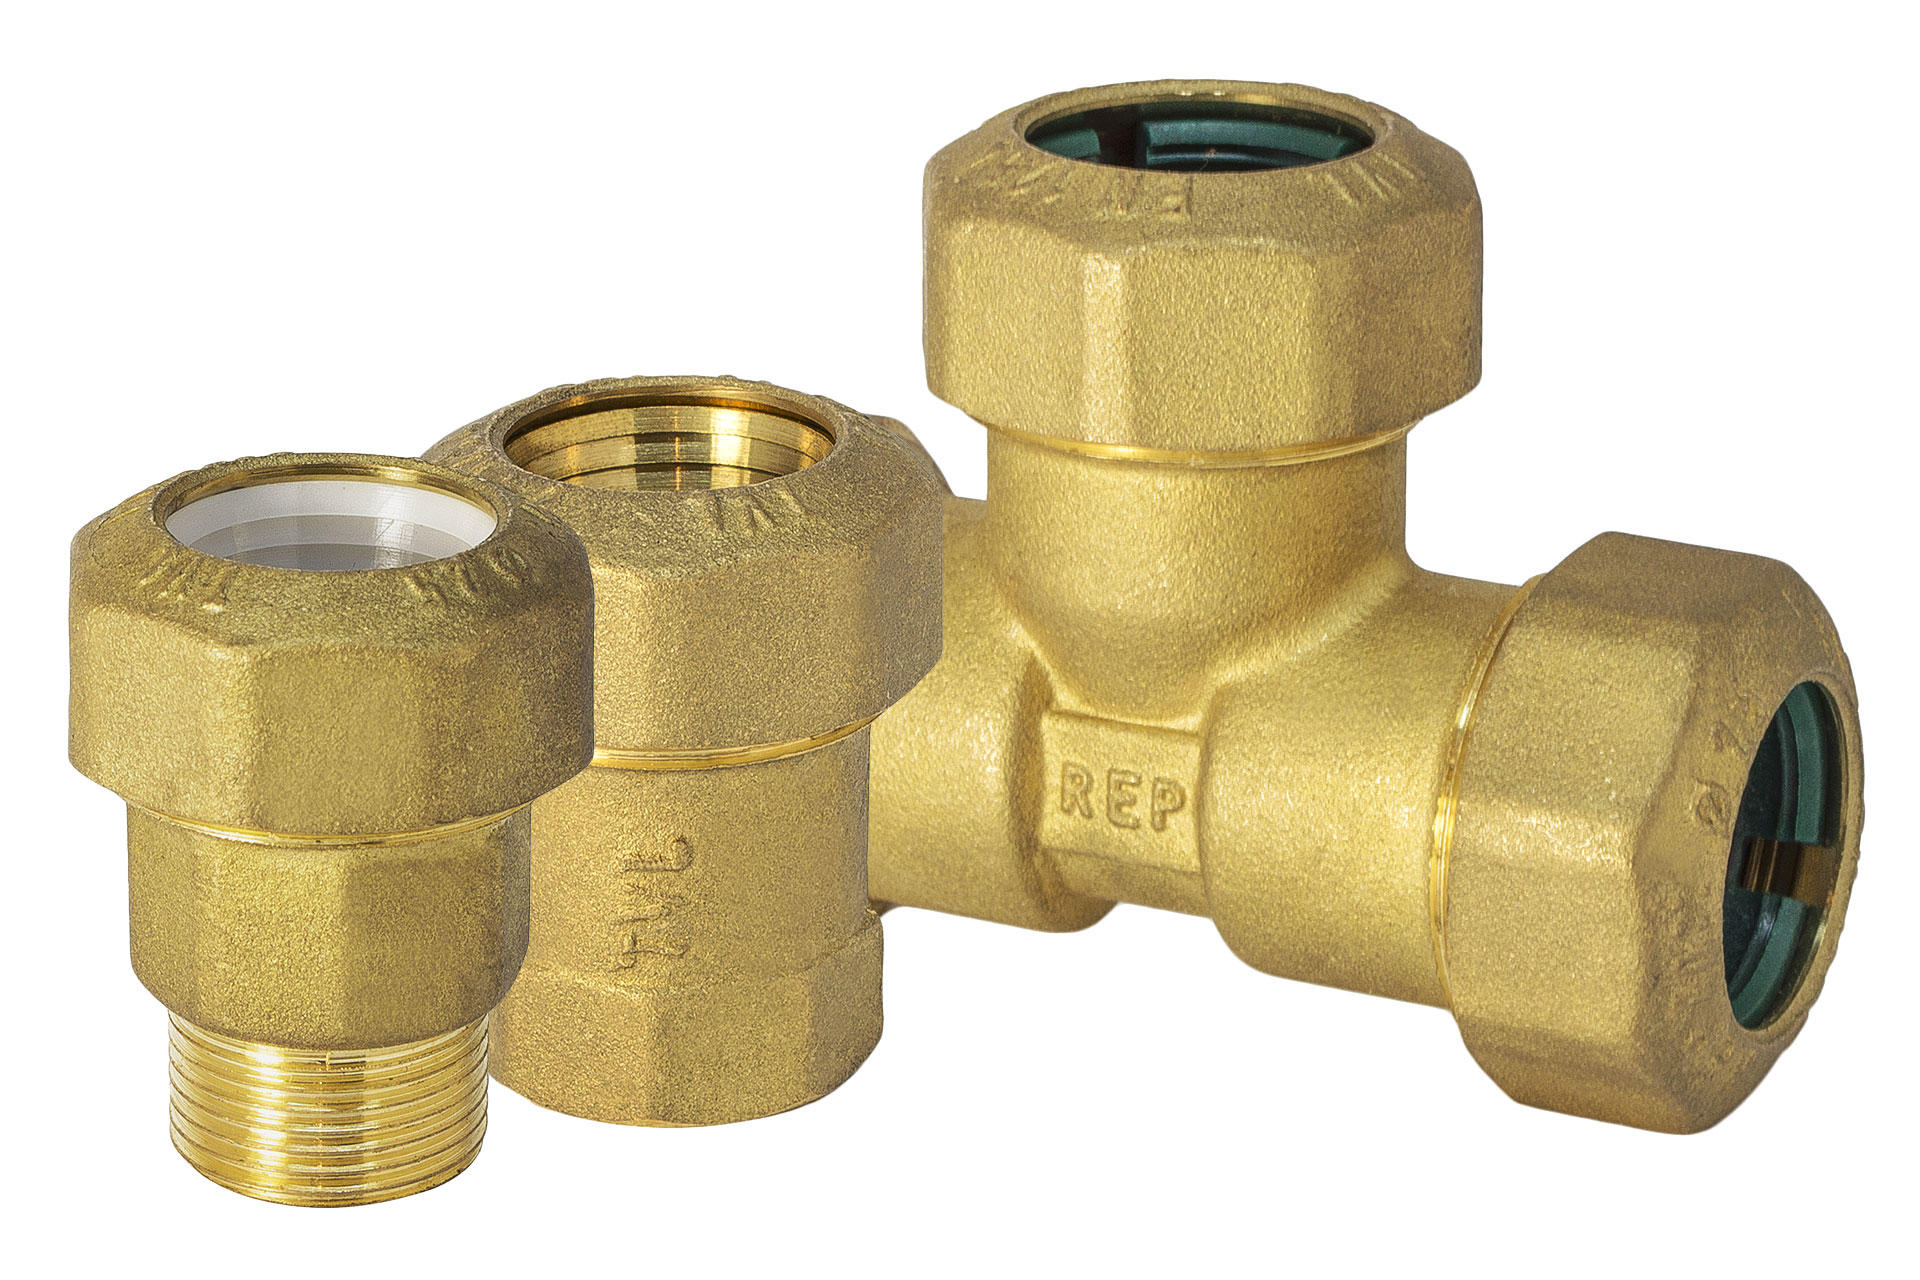 Iron pipe and Poly pipe fittings